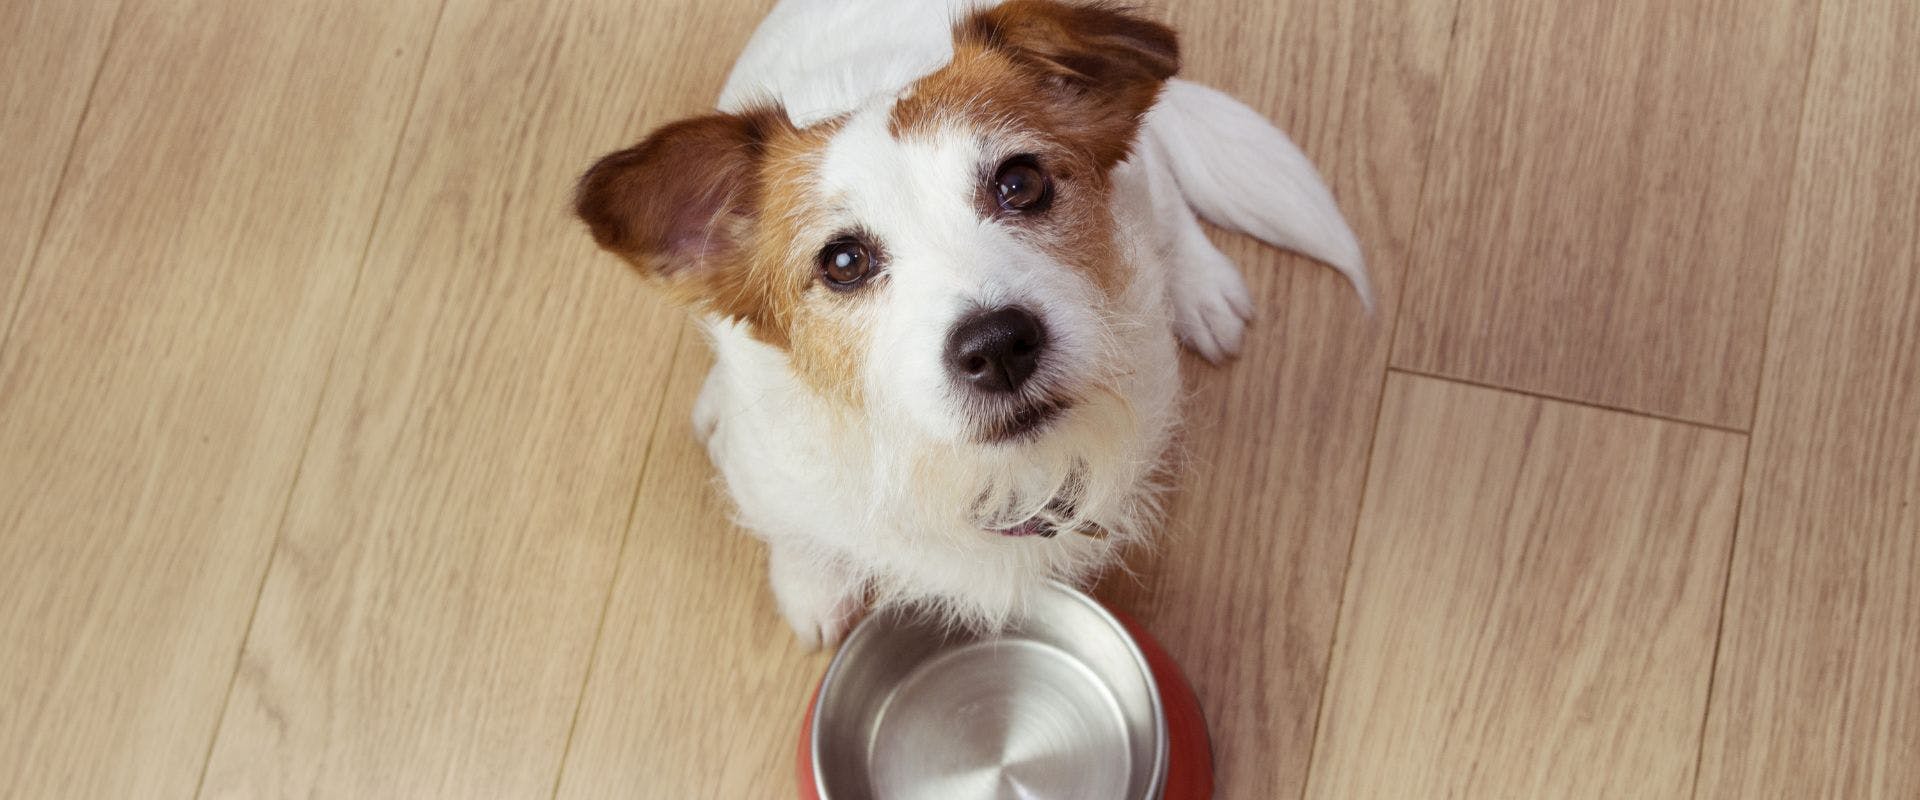 Long-haired Jack Russell waiting for food from a metal bowl